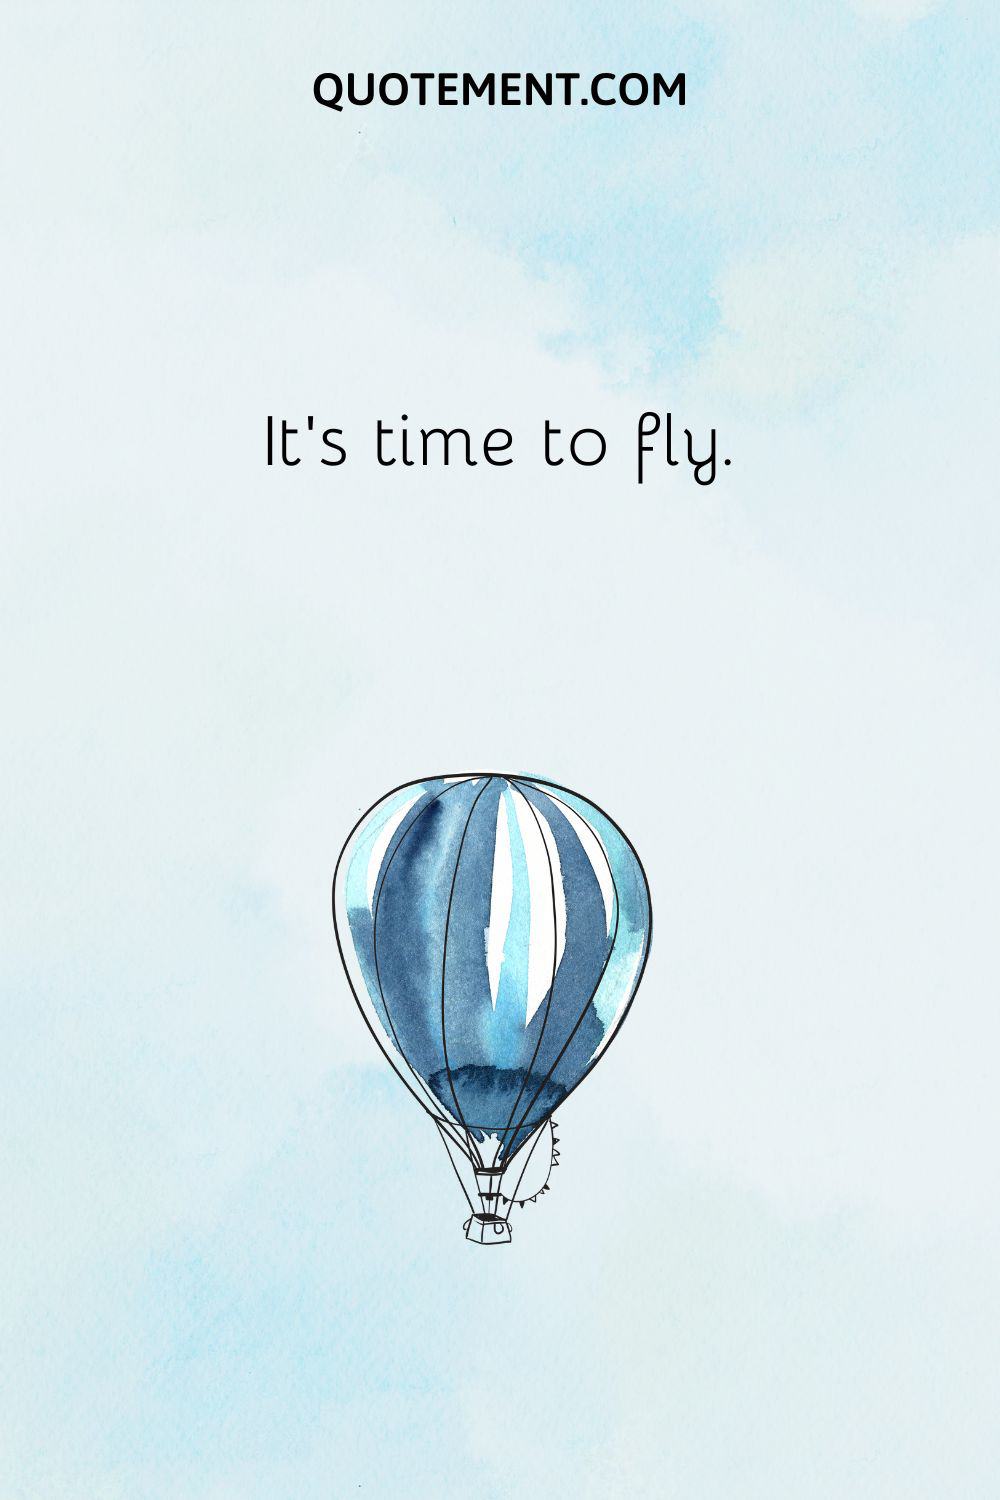  It’s time to fly.